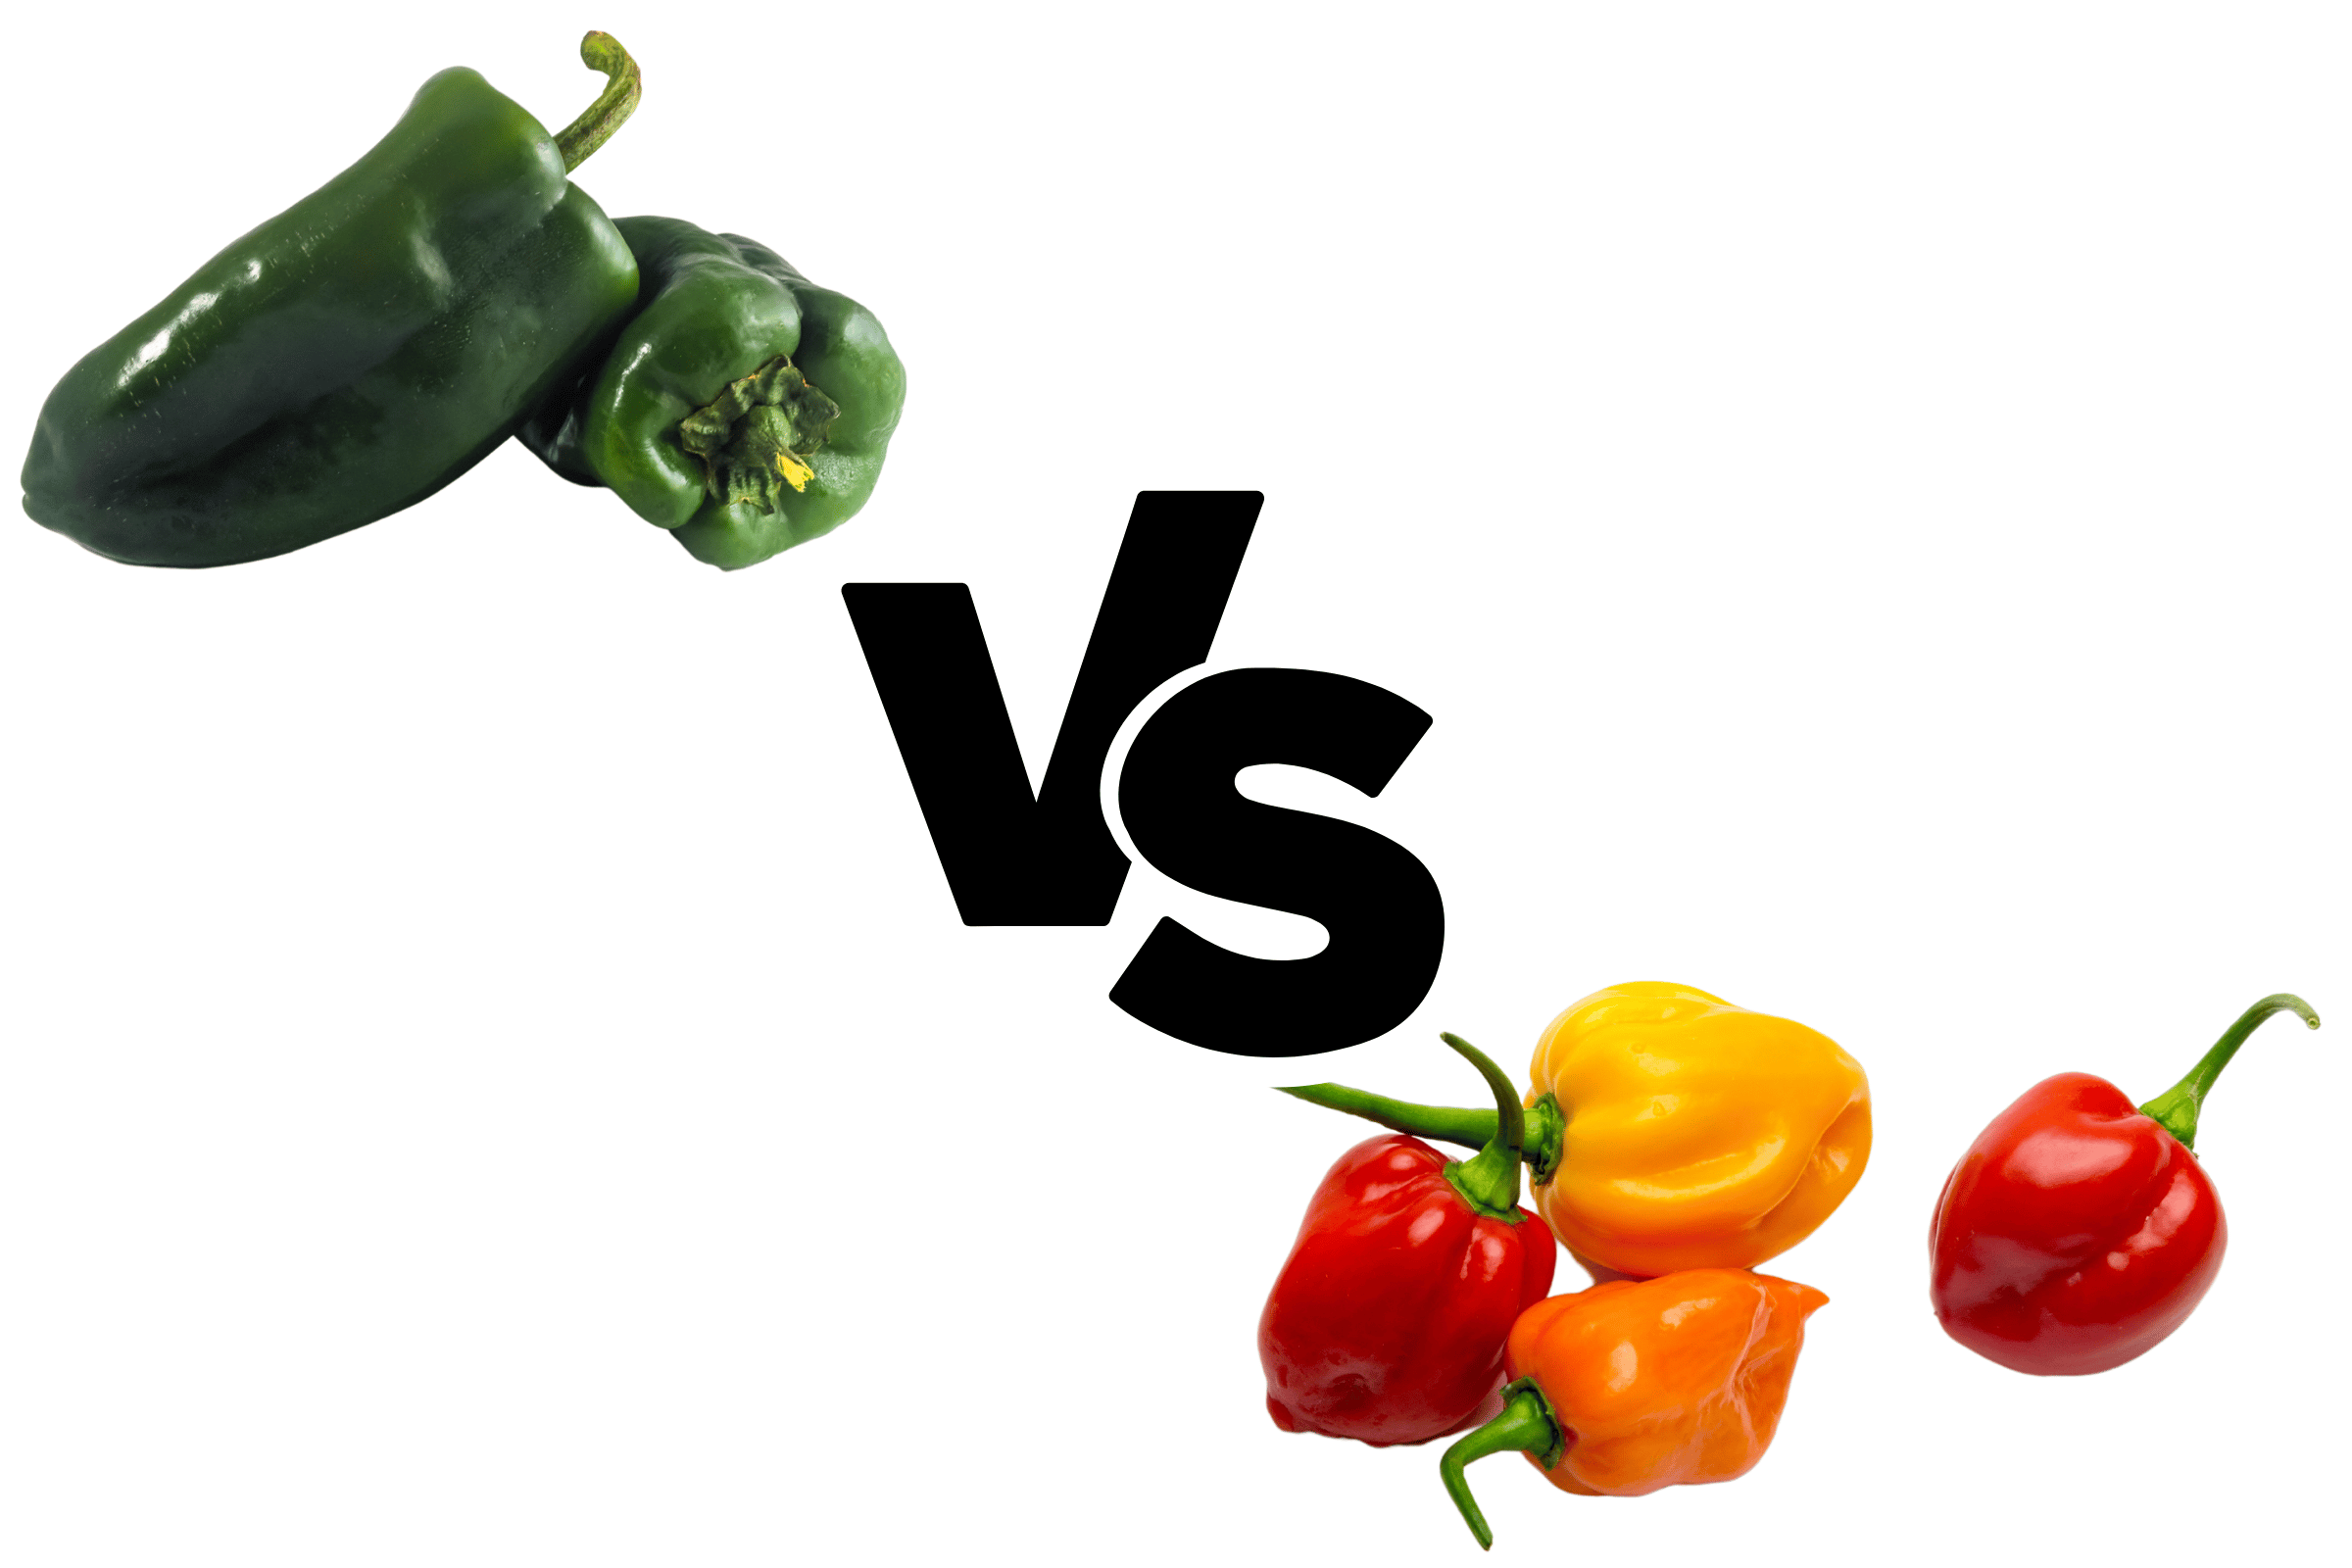 Poblano peppers vs habanero peppers (based on heat, flavor, size, shape, nutrition, and substitutions).